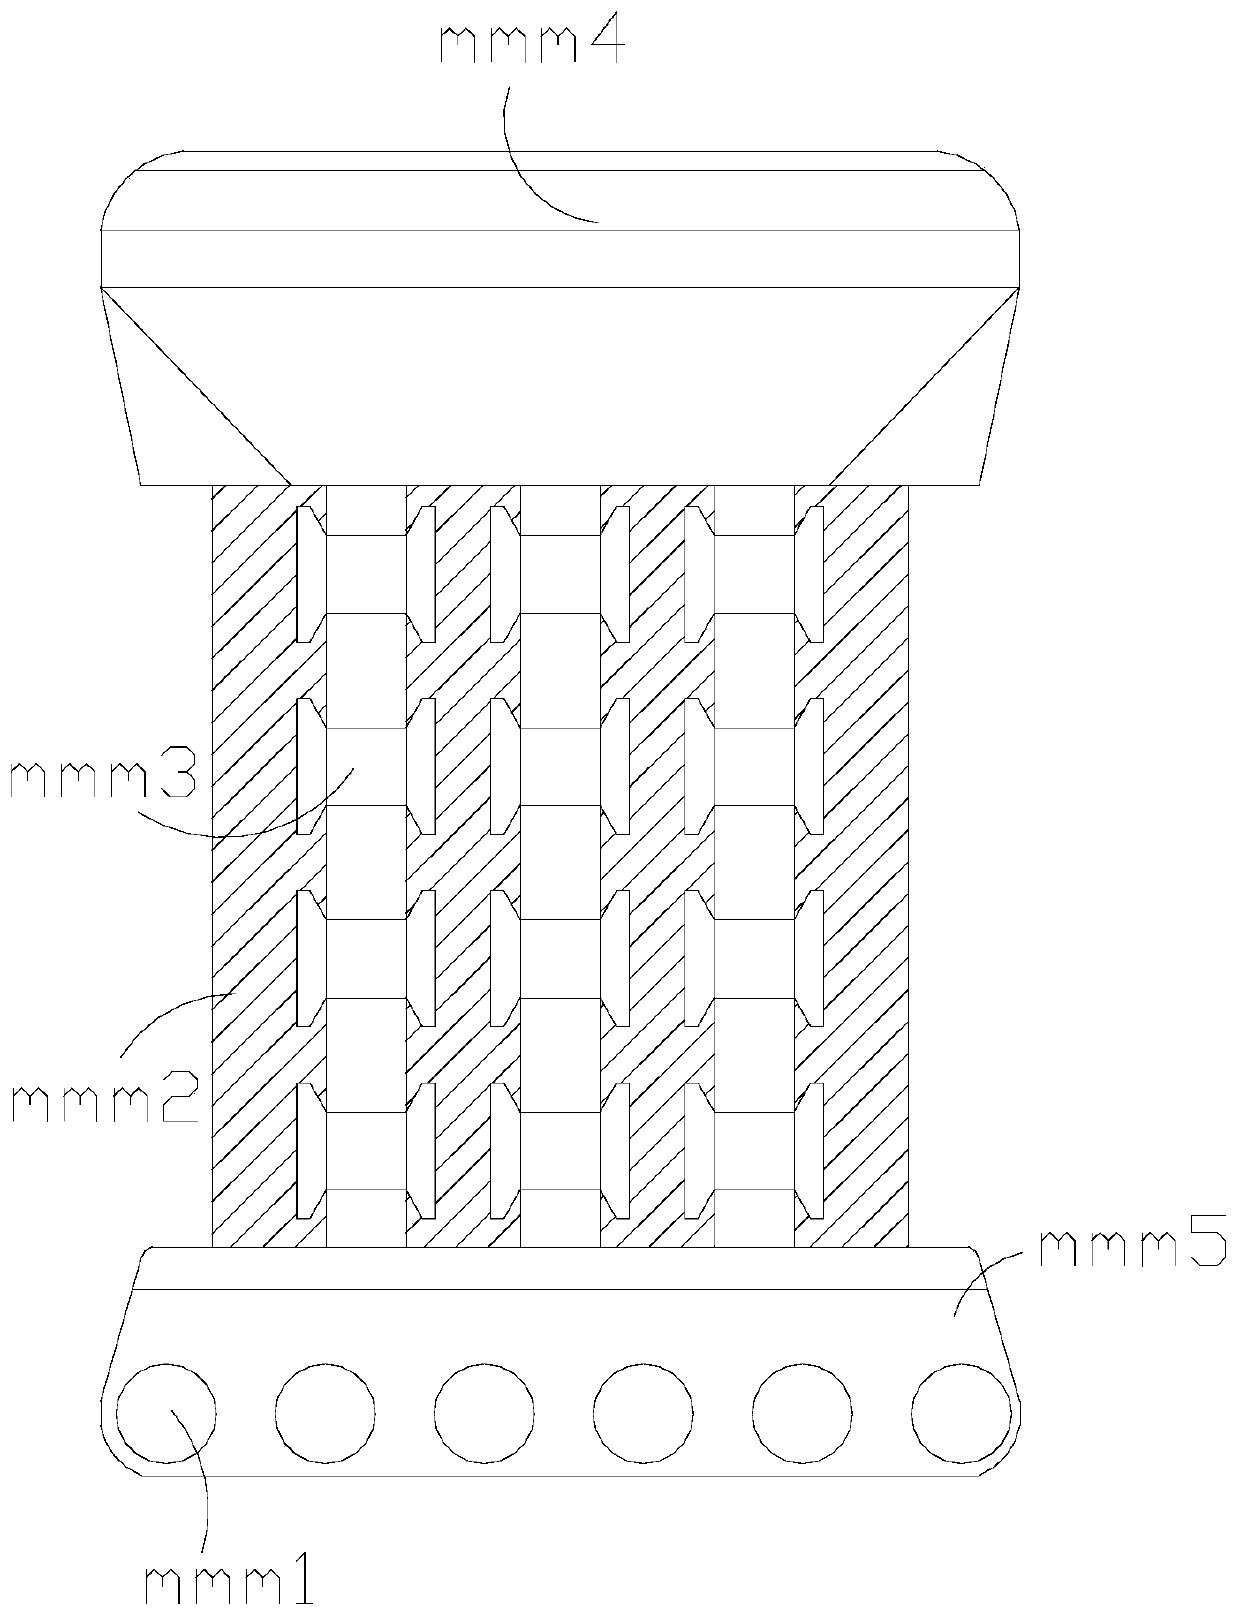 Laser welding feeding device for vertically welding concave characteristics on plate